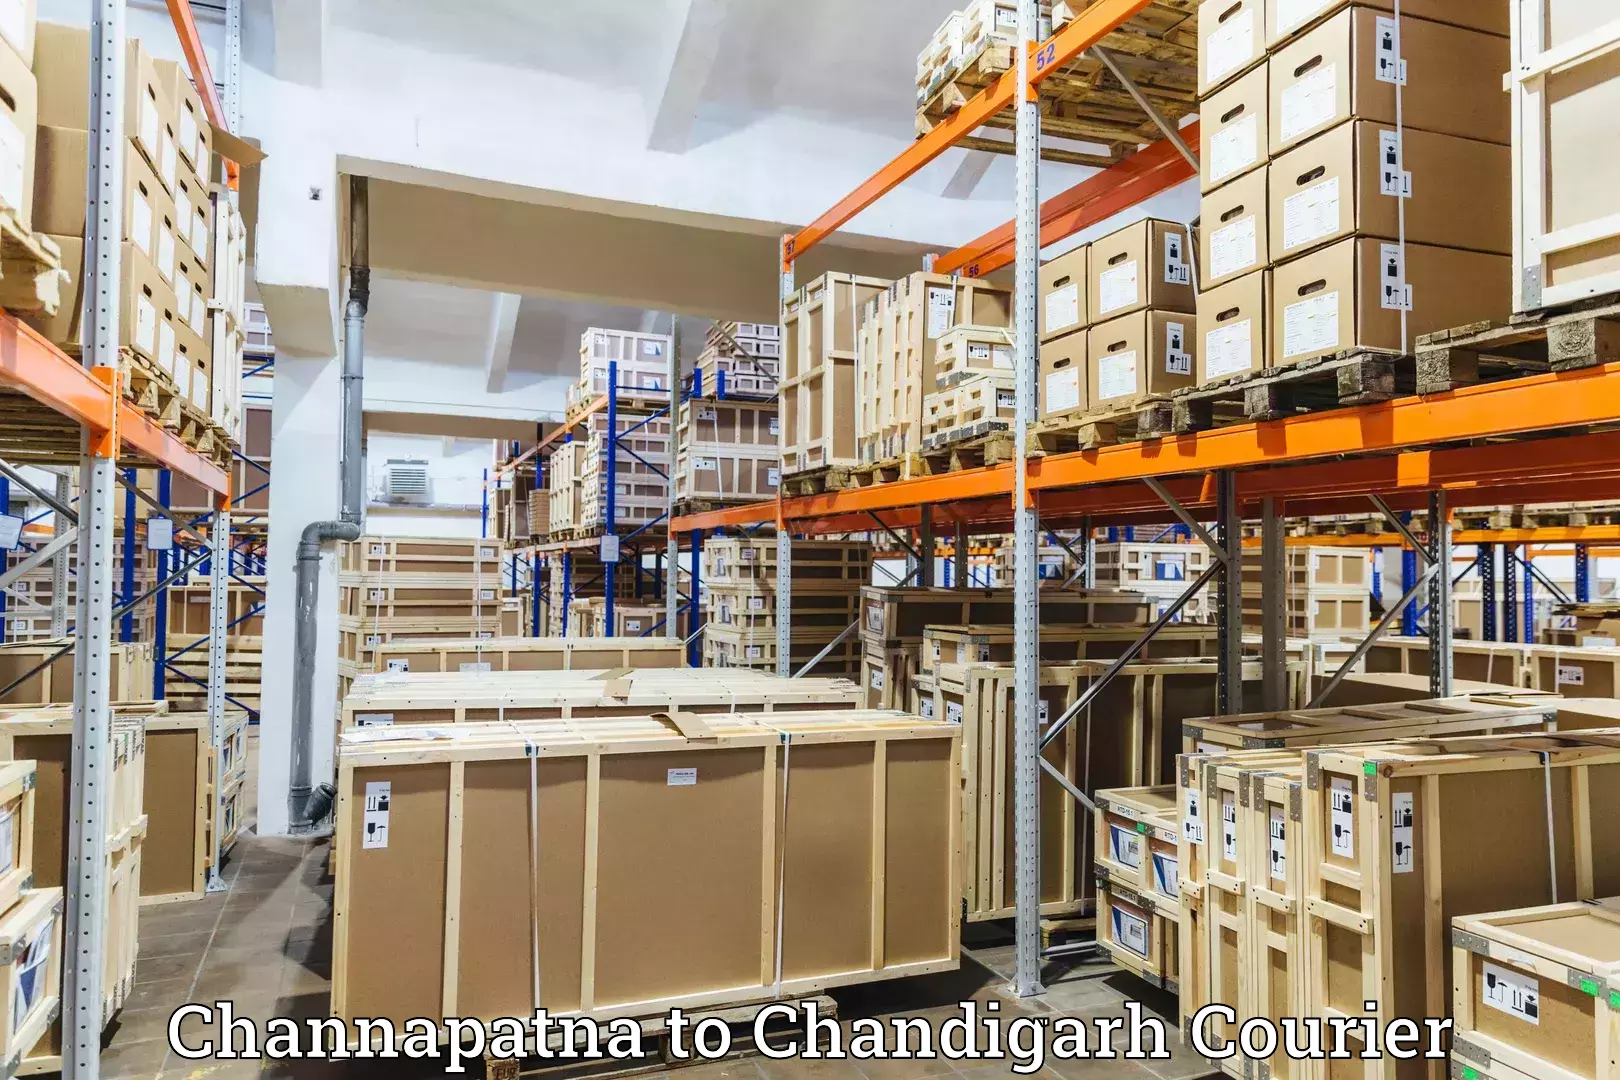 Express delivery solutions Channapatna to Chandigarh